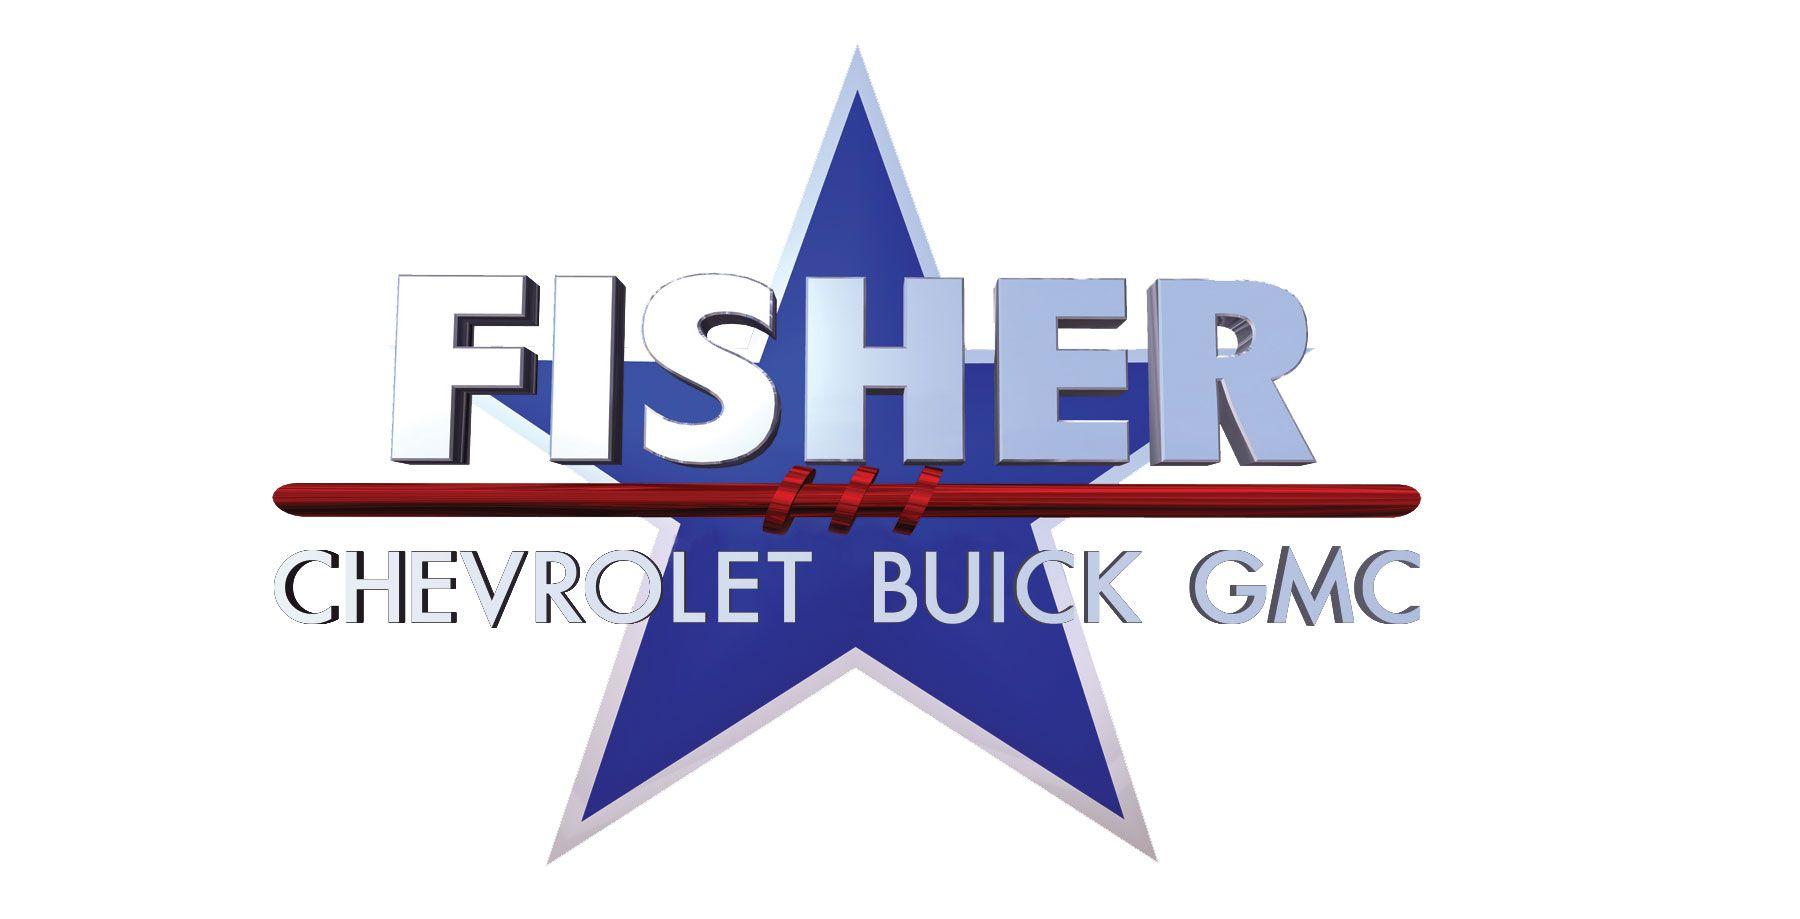 Chevy Buick Logo - Fisher Chevrolet Buick GMC in Yuma, AZ | New and Used Car Dealership